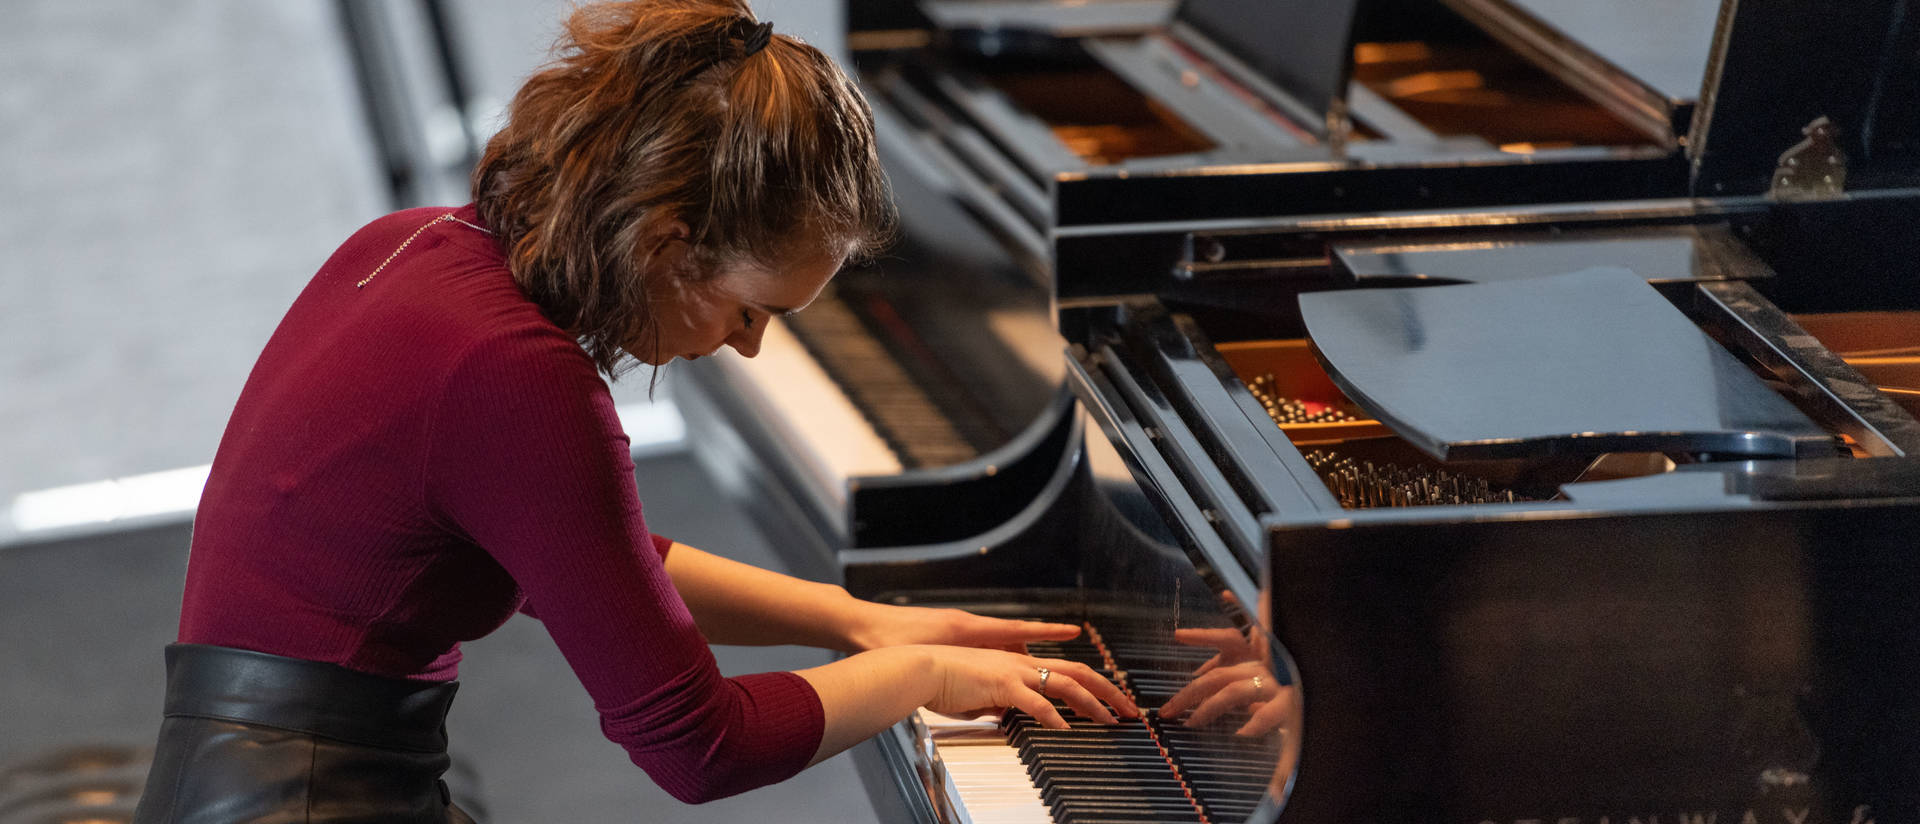 A person plays the piano during a performance.